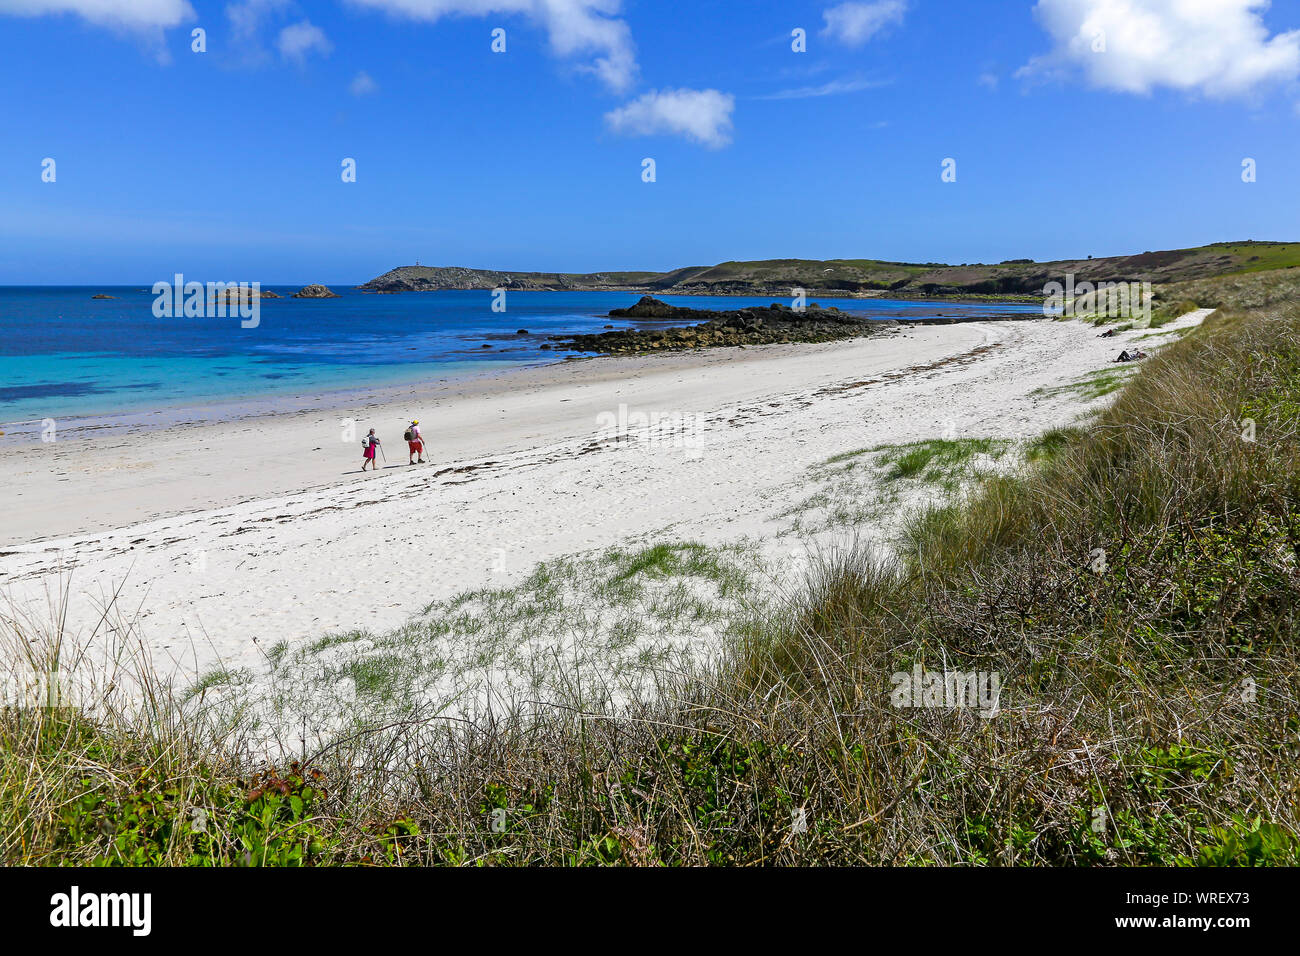 2 people walking on an almost deserted beach at Great Bay in St Martin's Bay, St. Martin’s Island, Isles of Scilly, Cornwall, England, UK Stock Photo